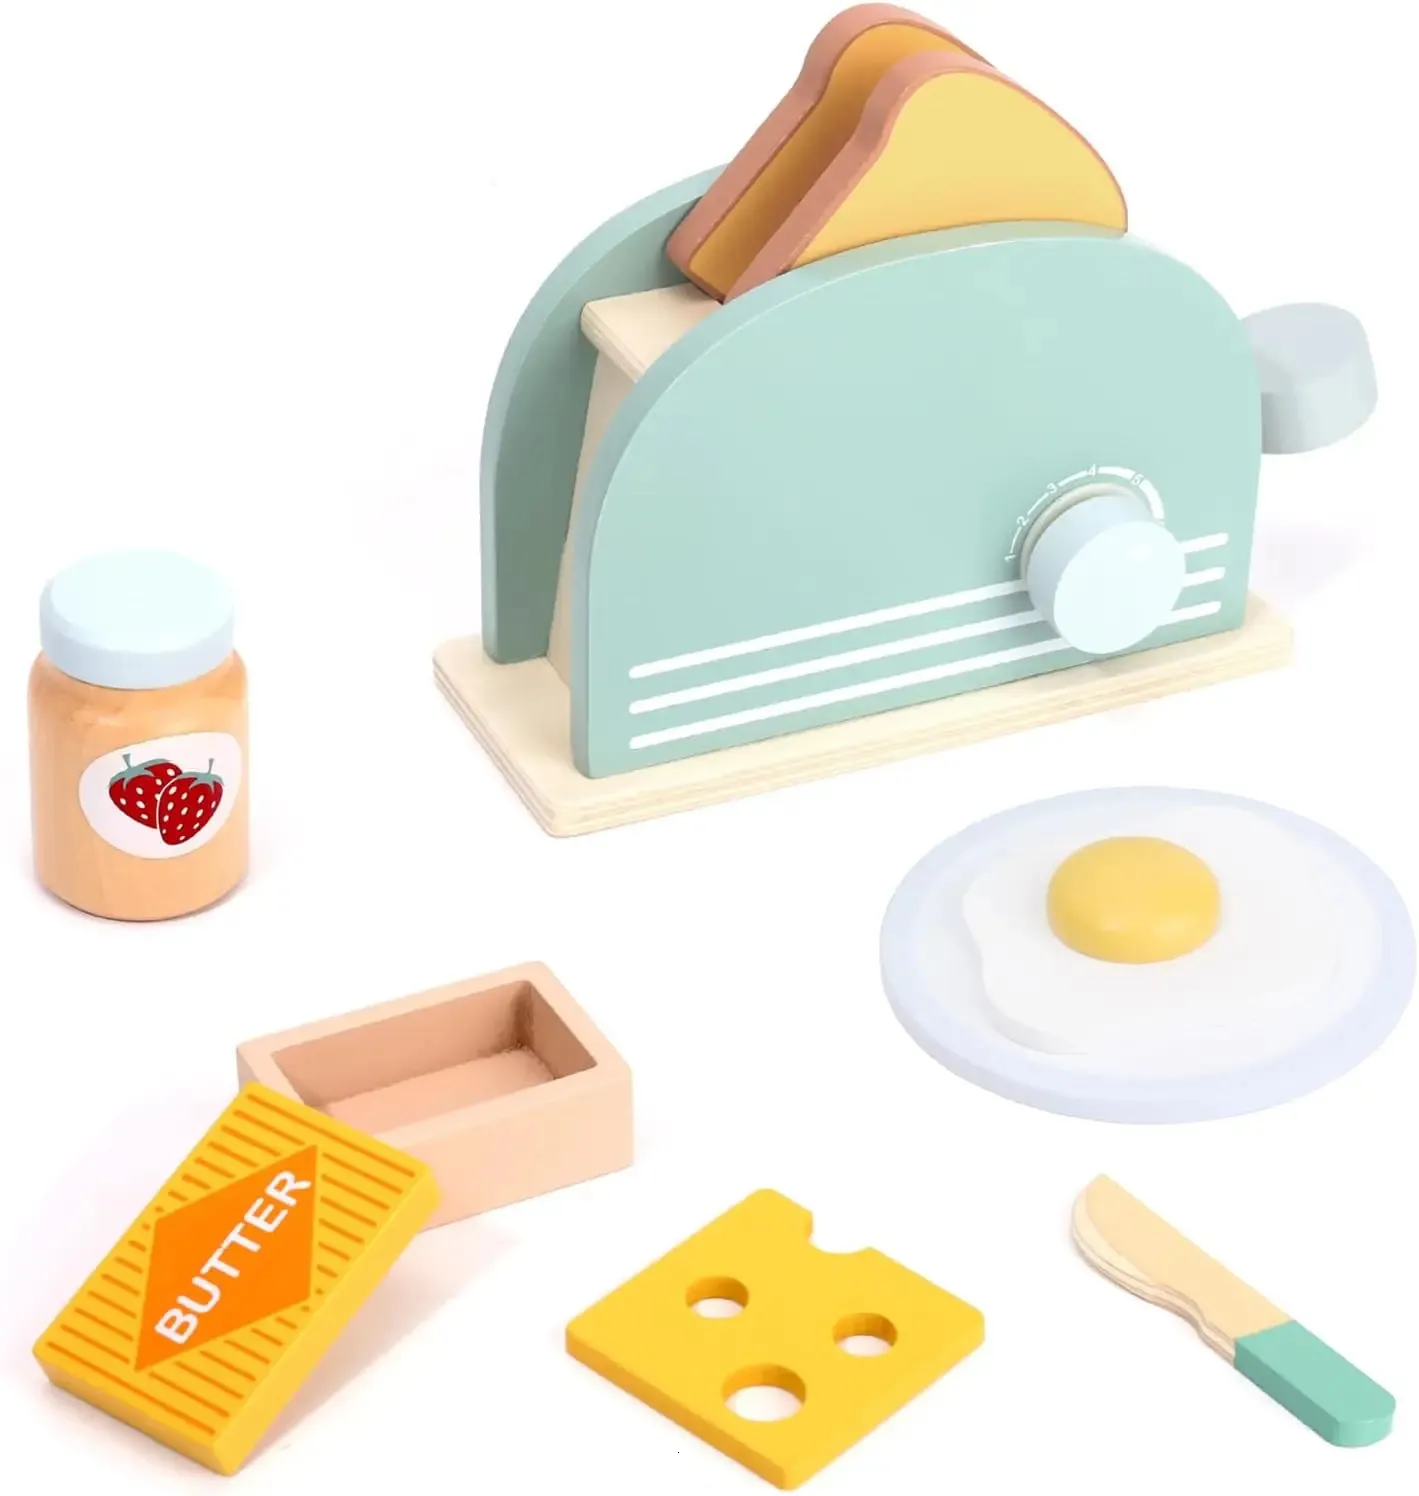 Wooden Simulation Kitchen Toy Set Pretend To Cook Play House Early Education Toy Bread Machine for Kids Christmas Gifts 240131